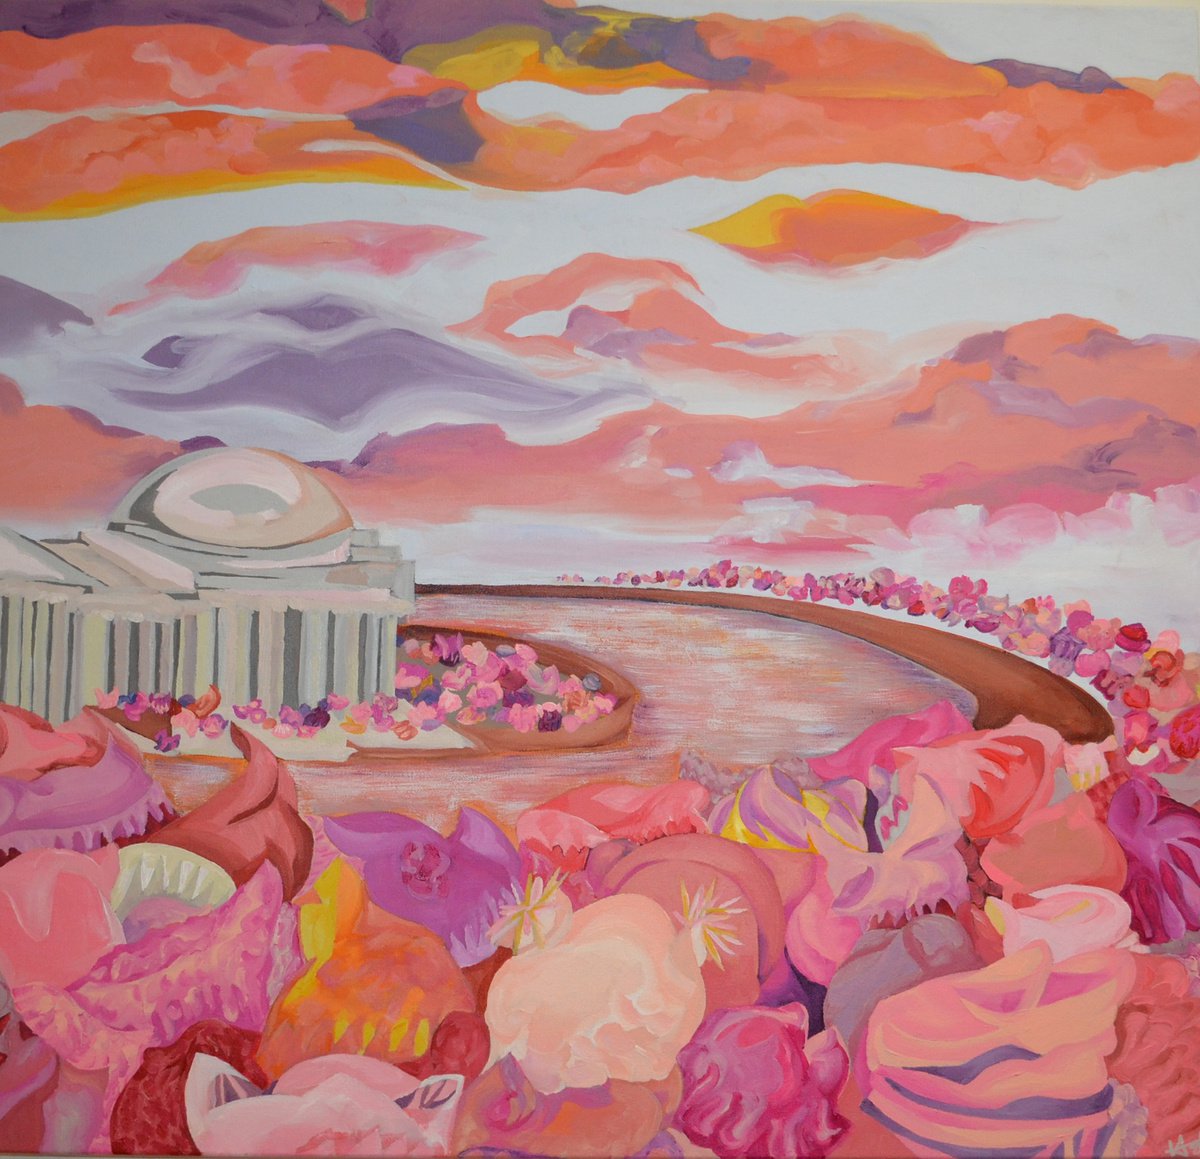 Women’s March, Blossoms on the Tidal Basin by Elizabeth Ashe